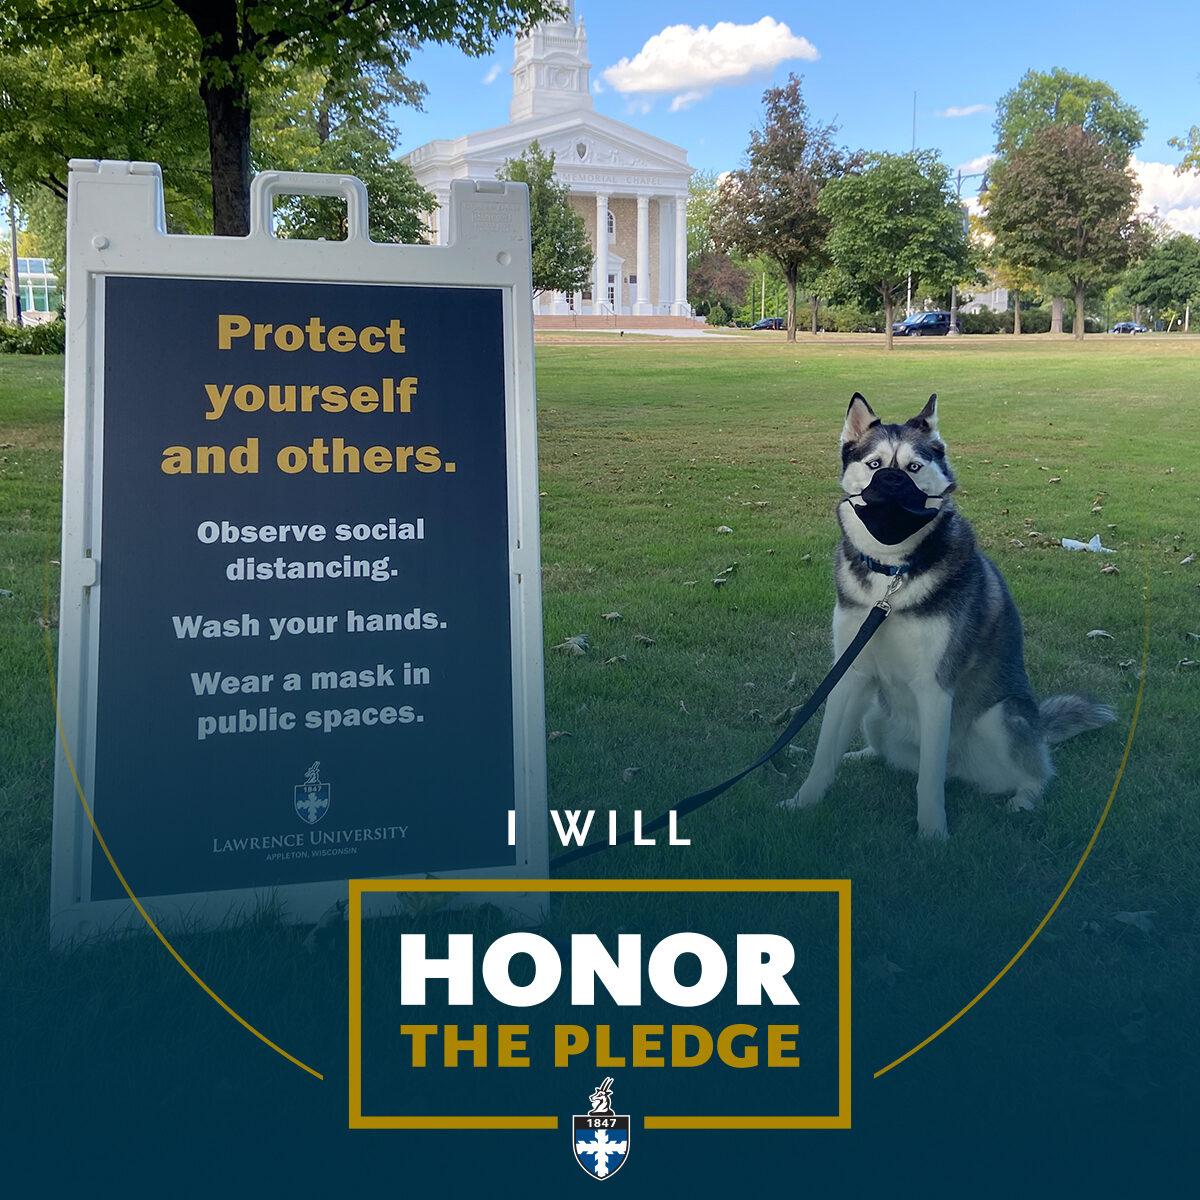 Sign that says "Protect yourself and others. Observe social distancing. Washing your hands. Wear a mask in public spaces." With a husky dog in a mask sitting on a lawn with Memorial Chapel in the background. Text that says "I will honor the pledge." is in the foreground.